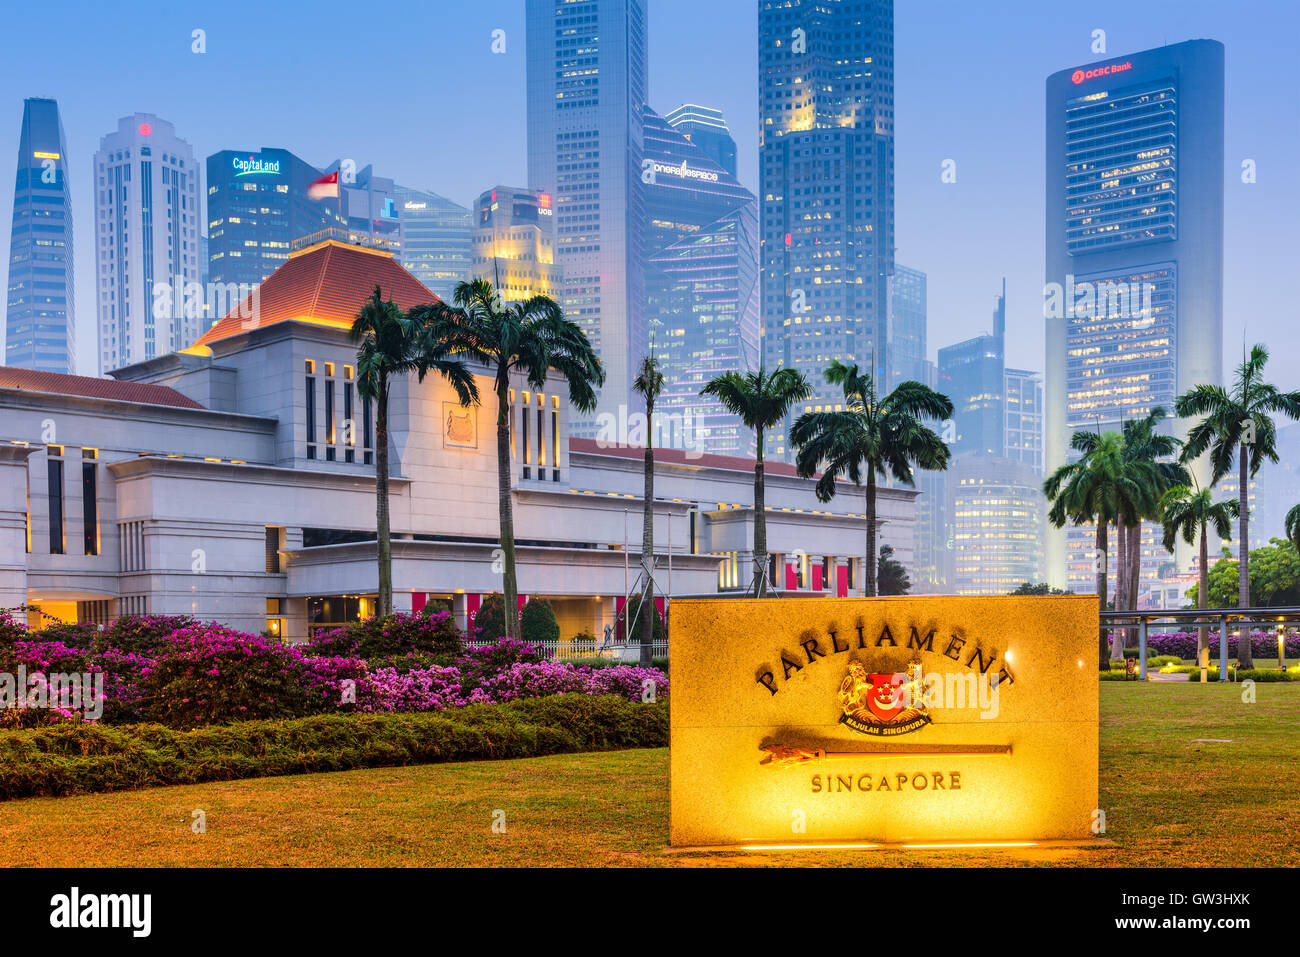 SINGAPORE - SEPTEMBER 9, 2015: Parliament of the Republic of Singapore building. The building dates from 1999. Stock Photo